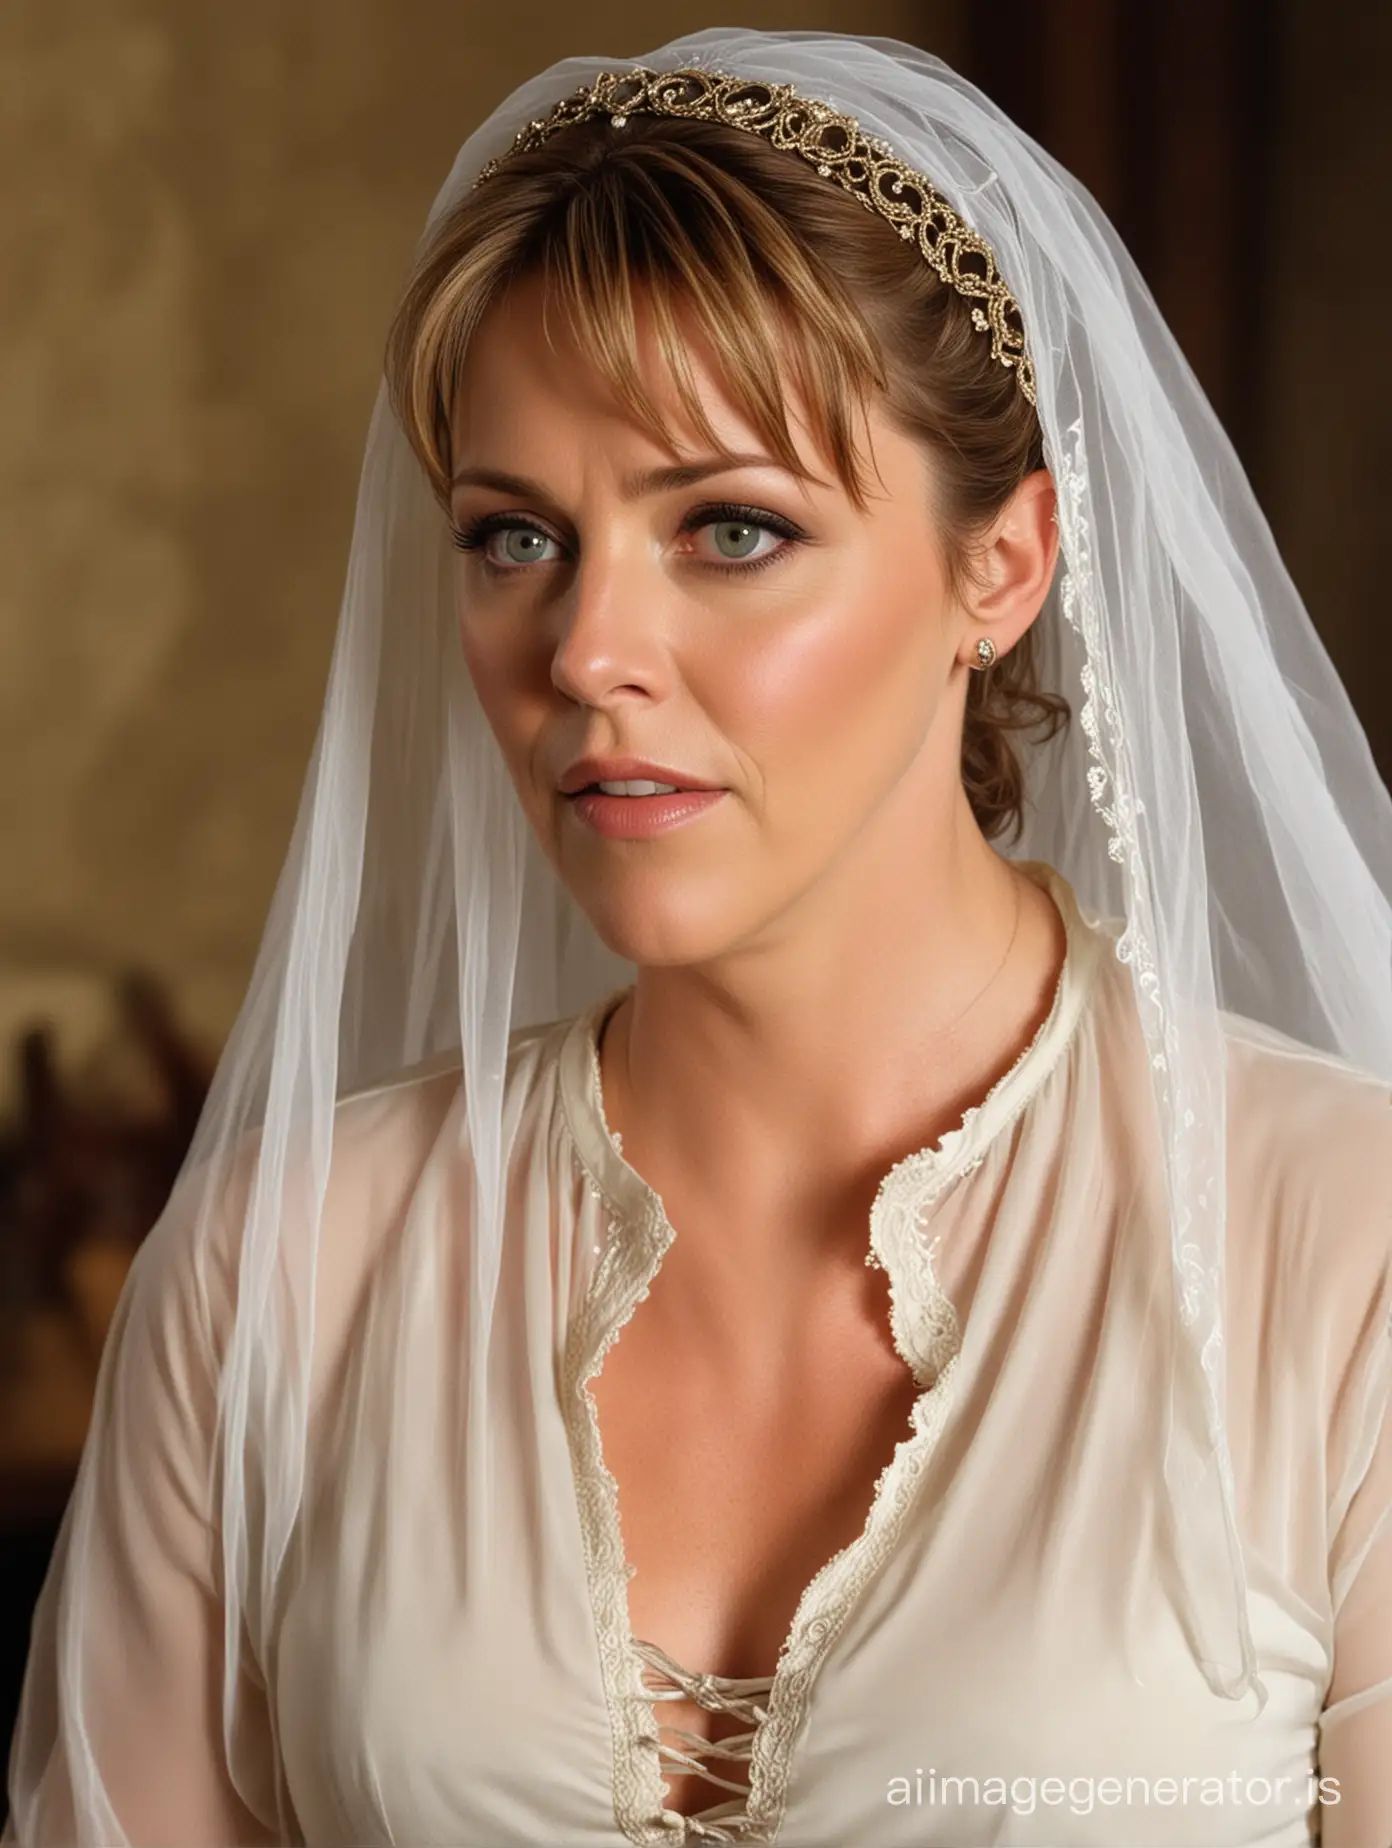 amanda tapping as major samantha carter hypnotized , dressed and veiled as a medieval compliant demure and submissive wife